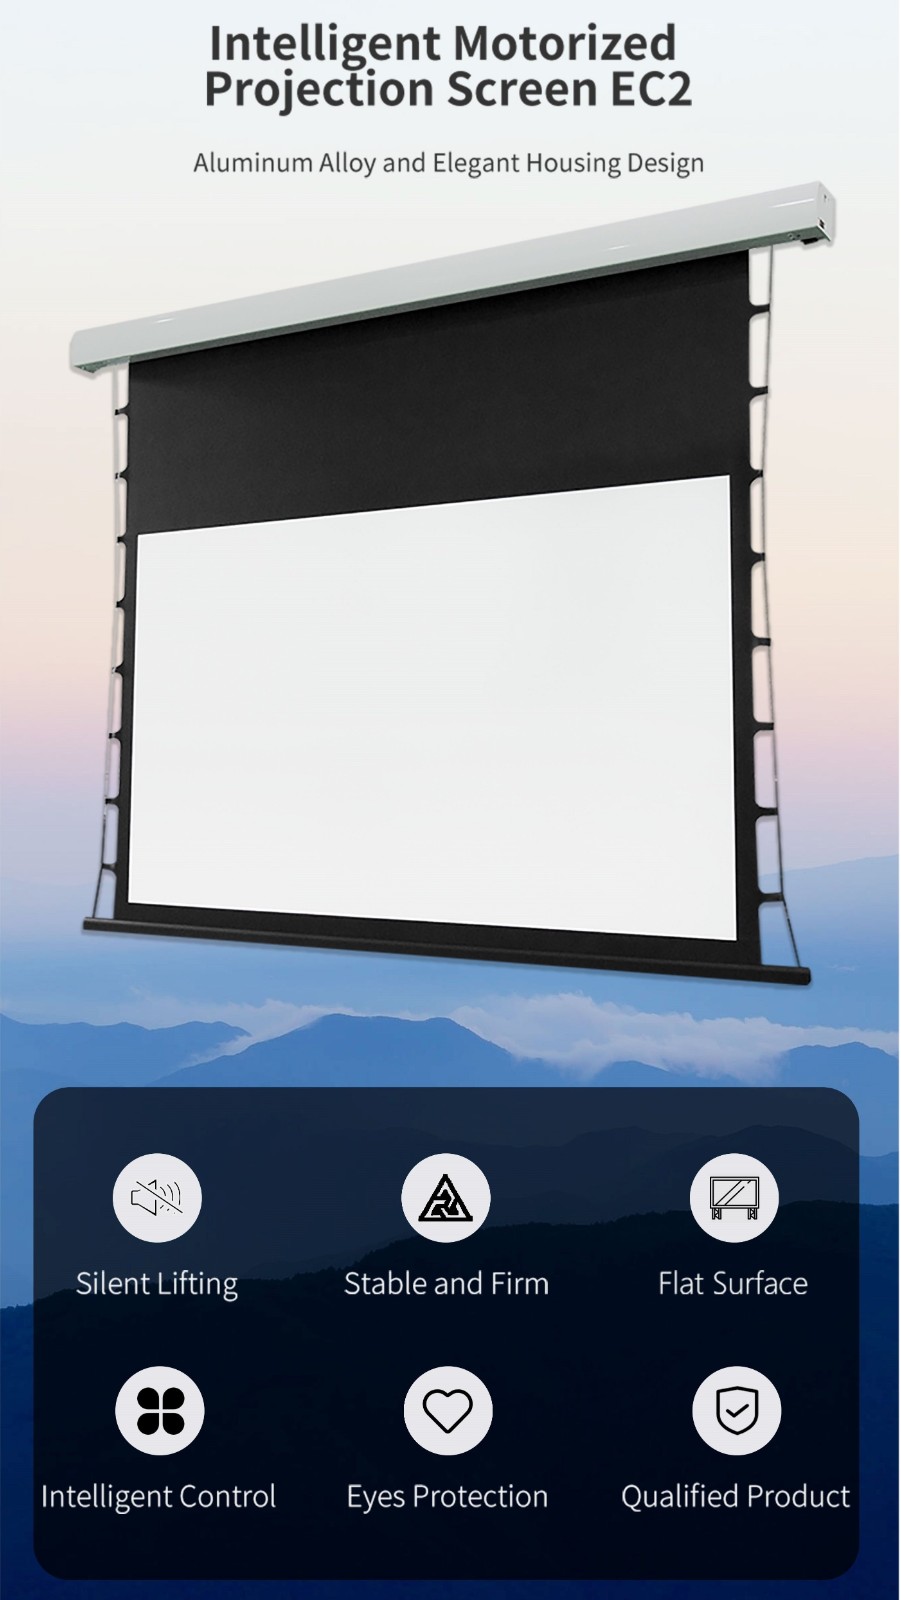 inceiling fixed projector screen design for living room-5